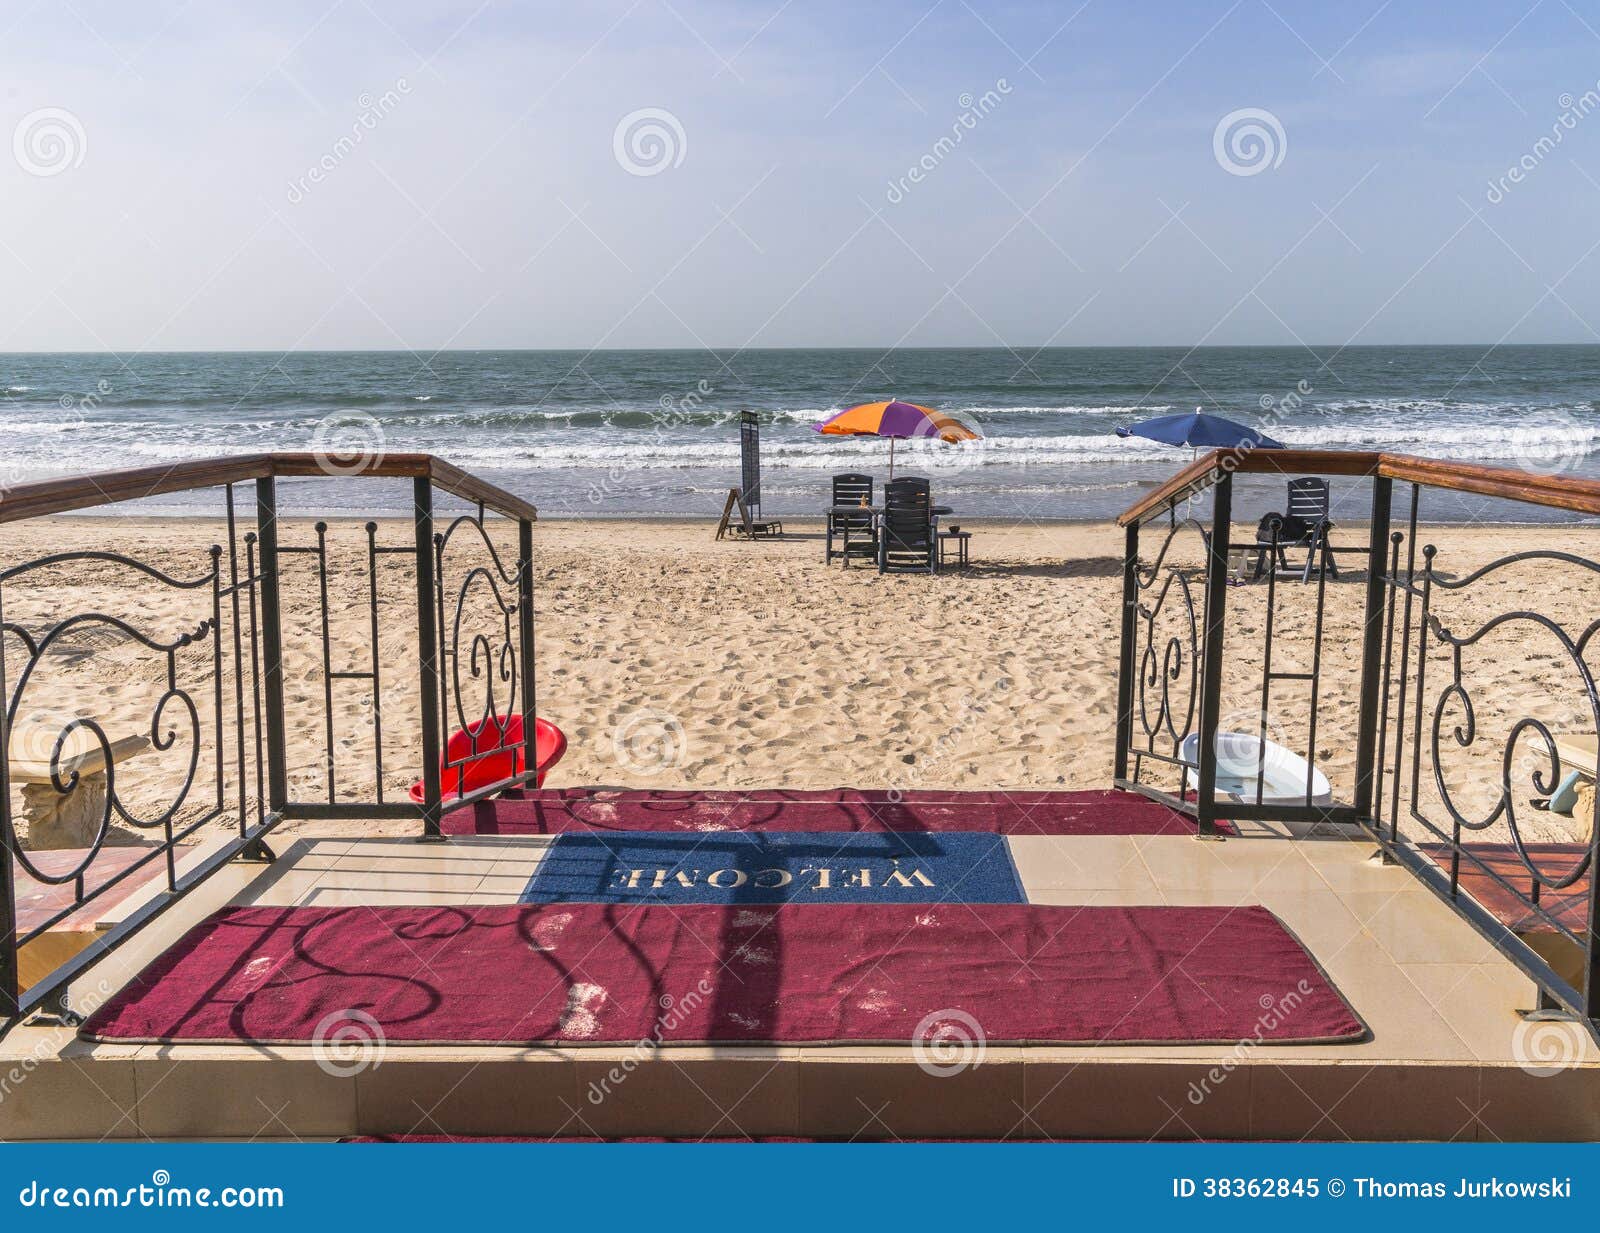 entrance to the beach